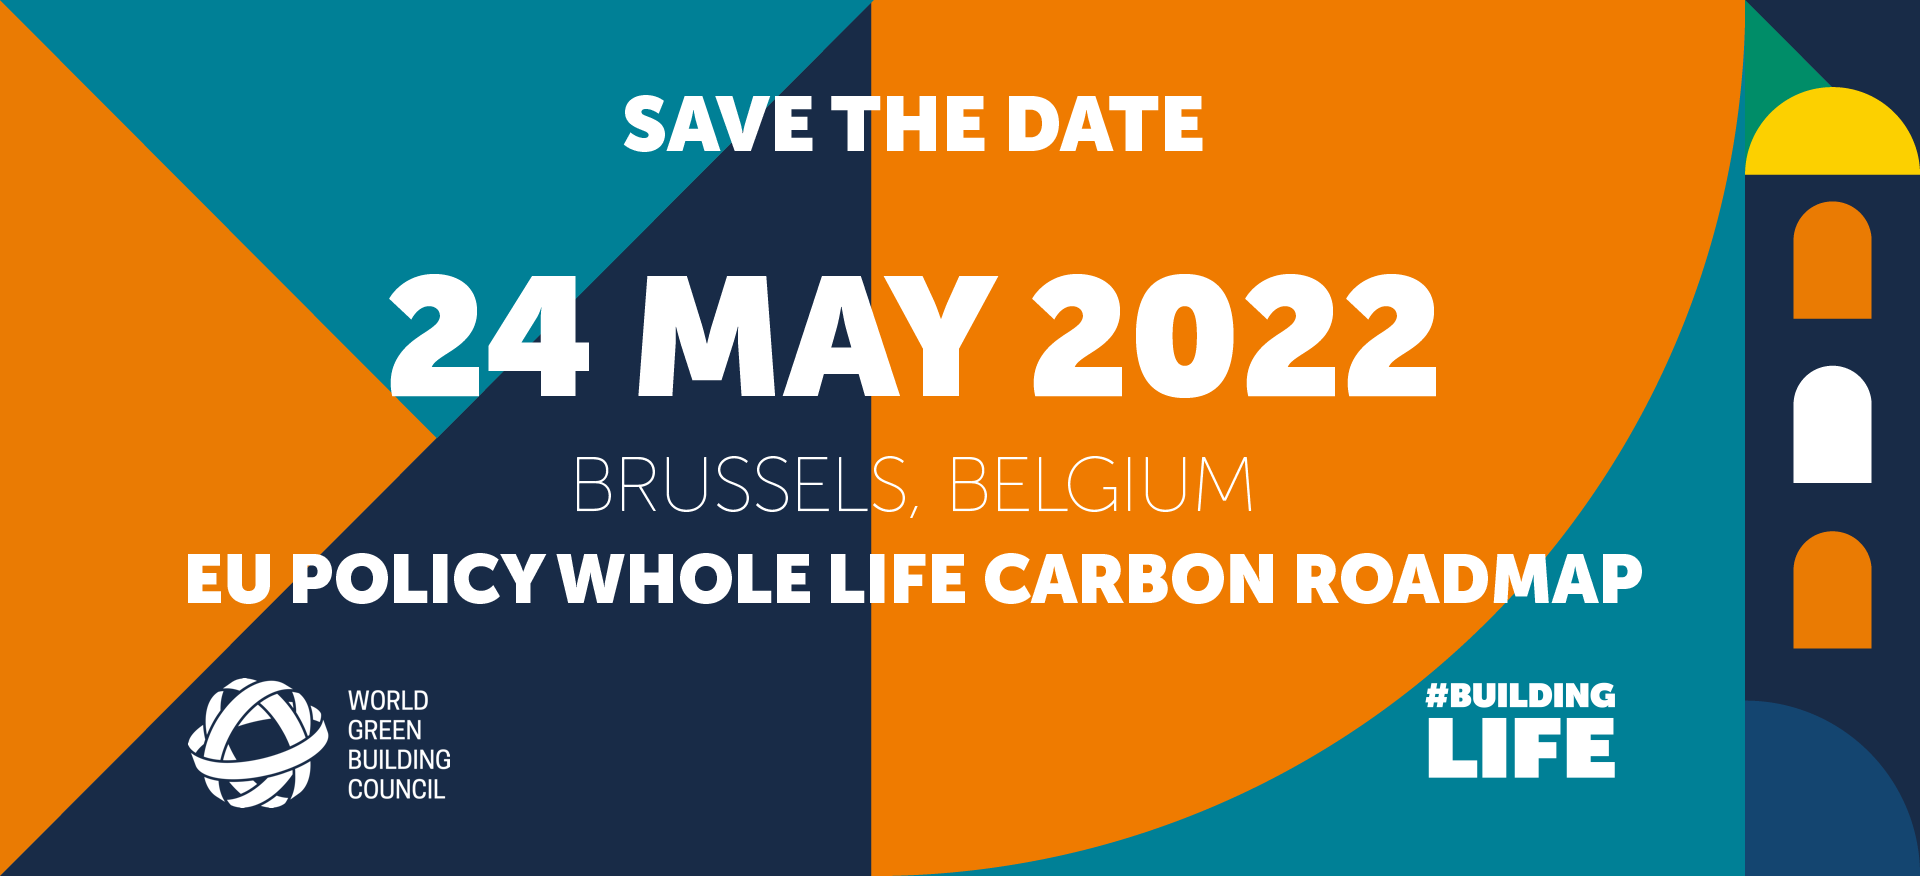 Launch of the #BuildingLife EU Policy Whole Life Carbon Roadmap for buildings